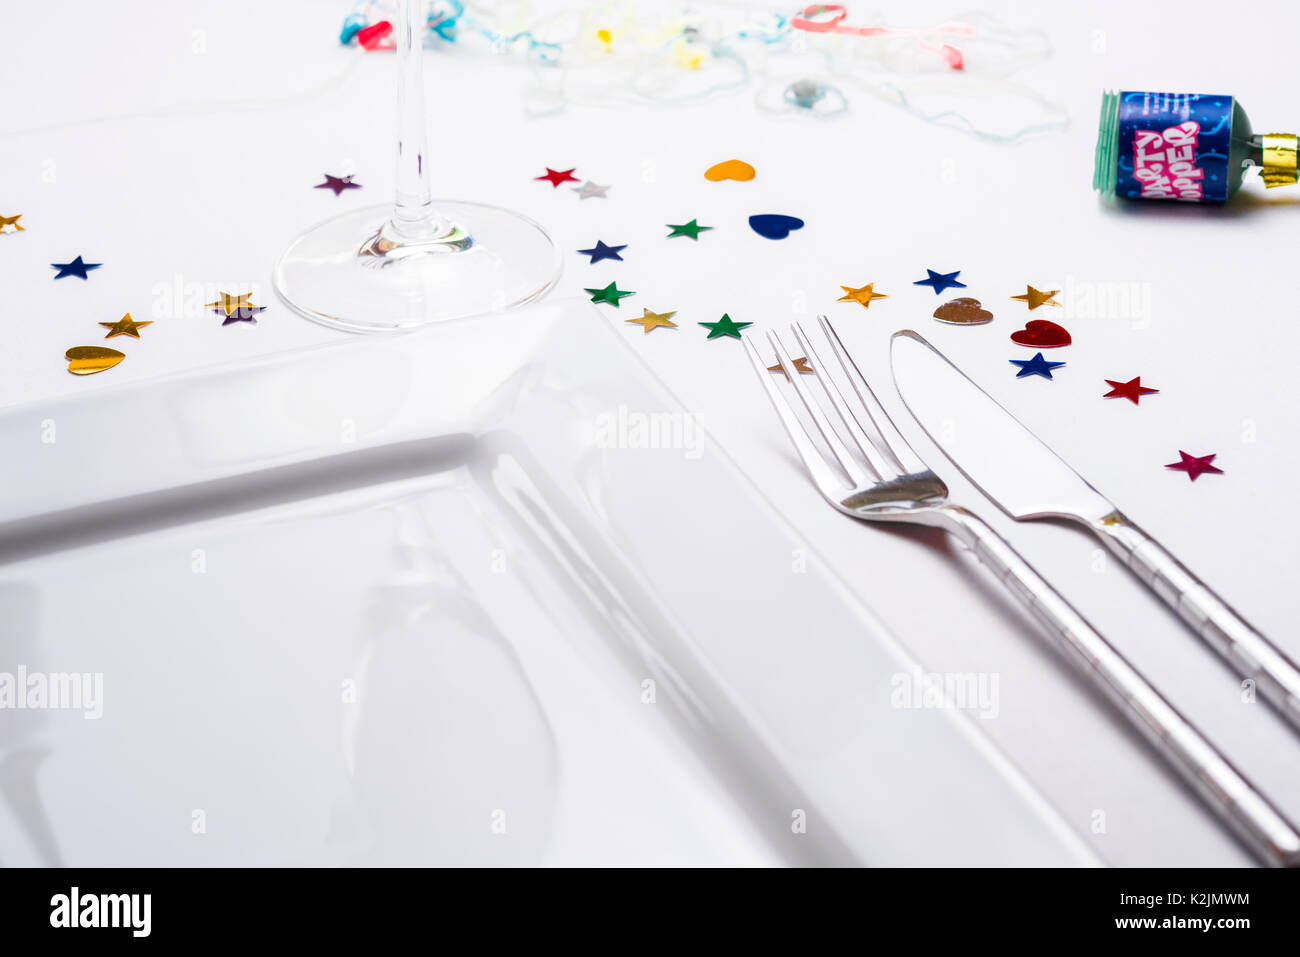 Single place table setting, knife fork plate, with decoration confetti. Stock Photo